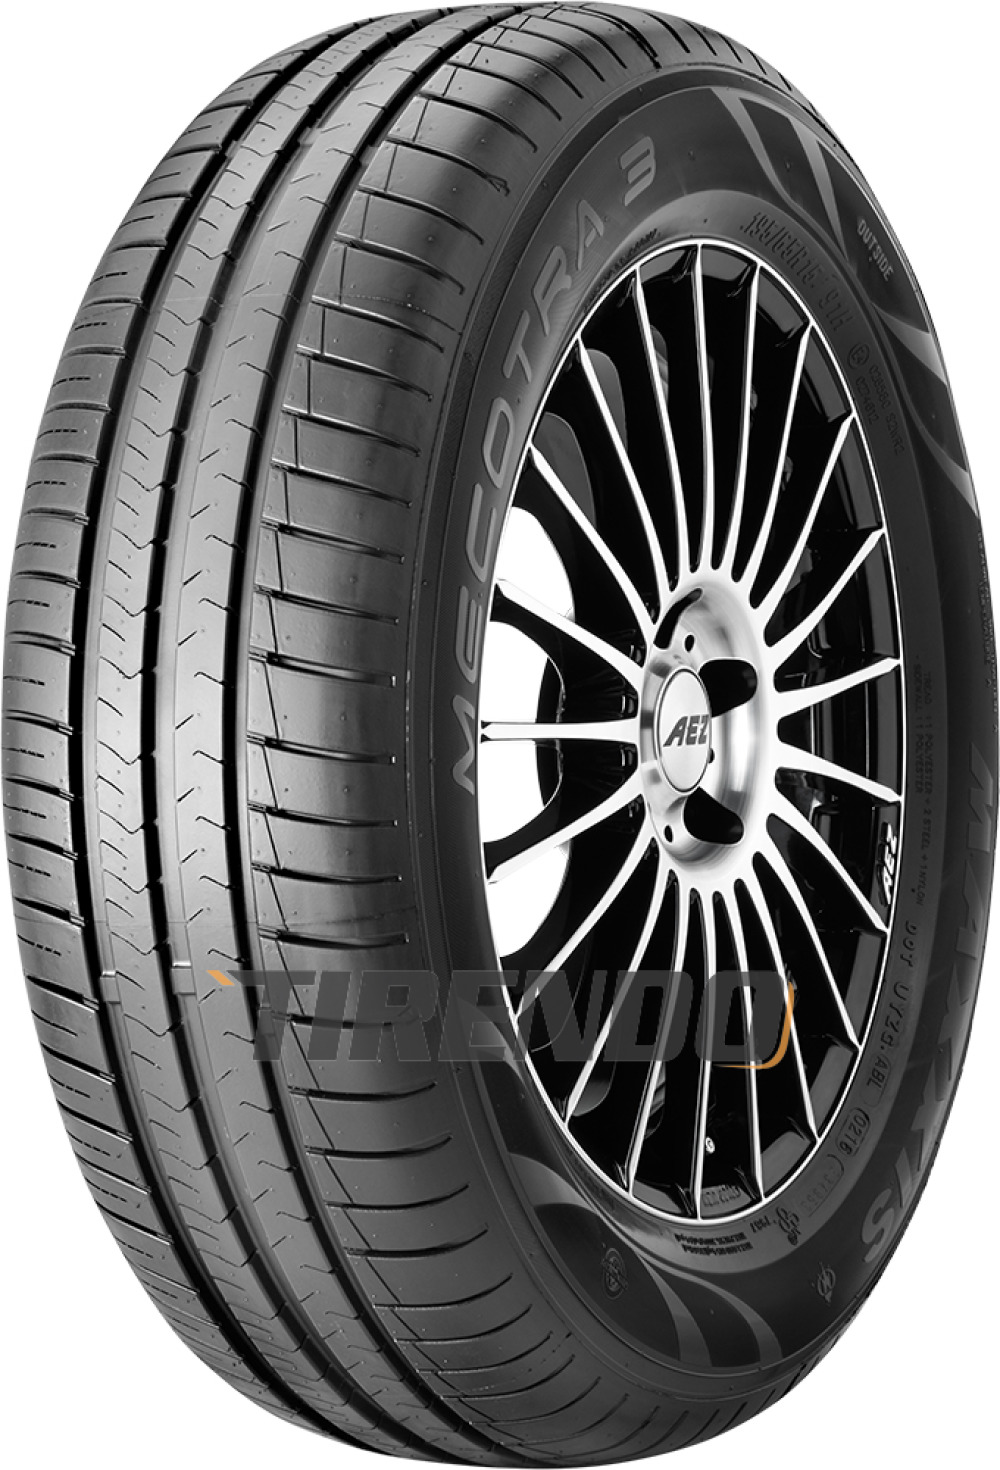 Maxxis Mecotra 3 ( 145/70 R13 71T ) von Maxxis